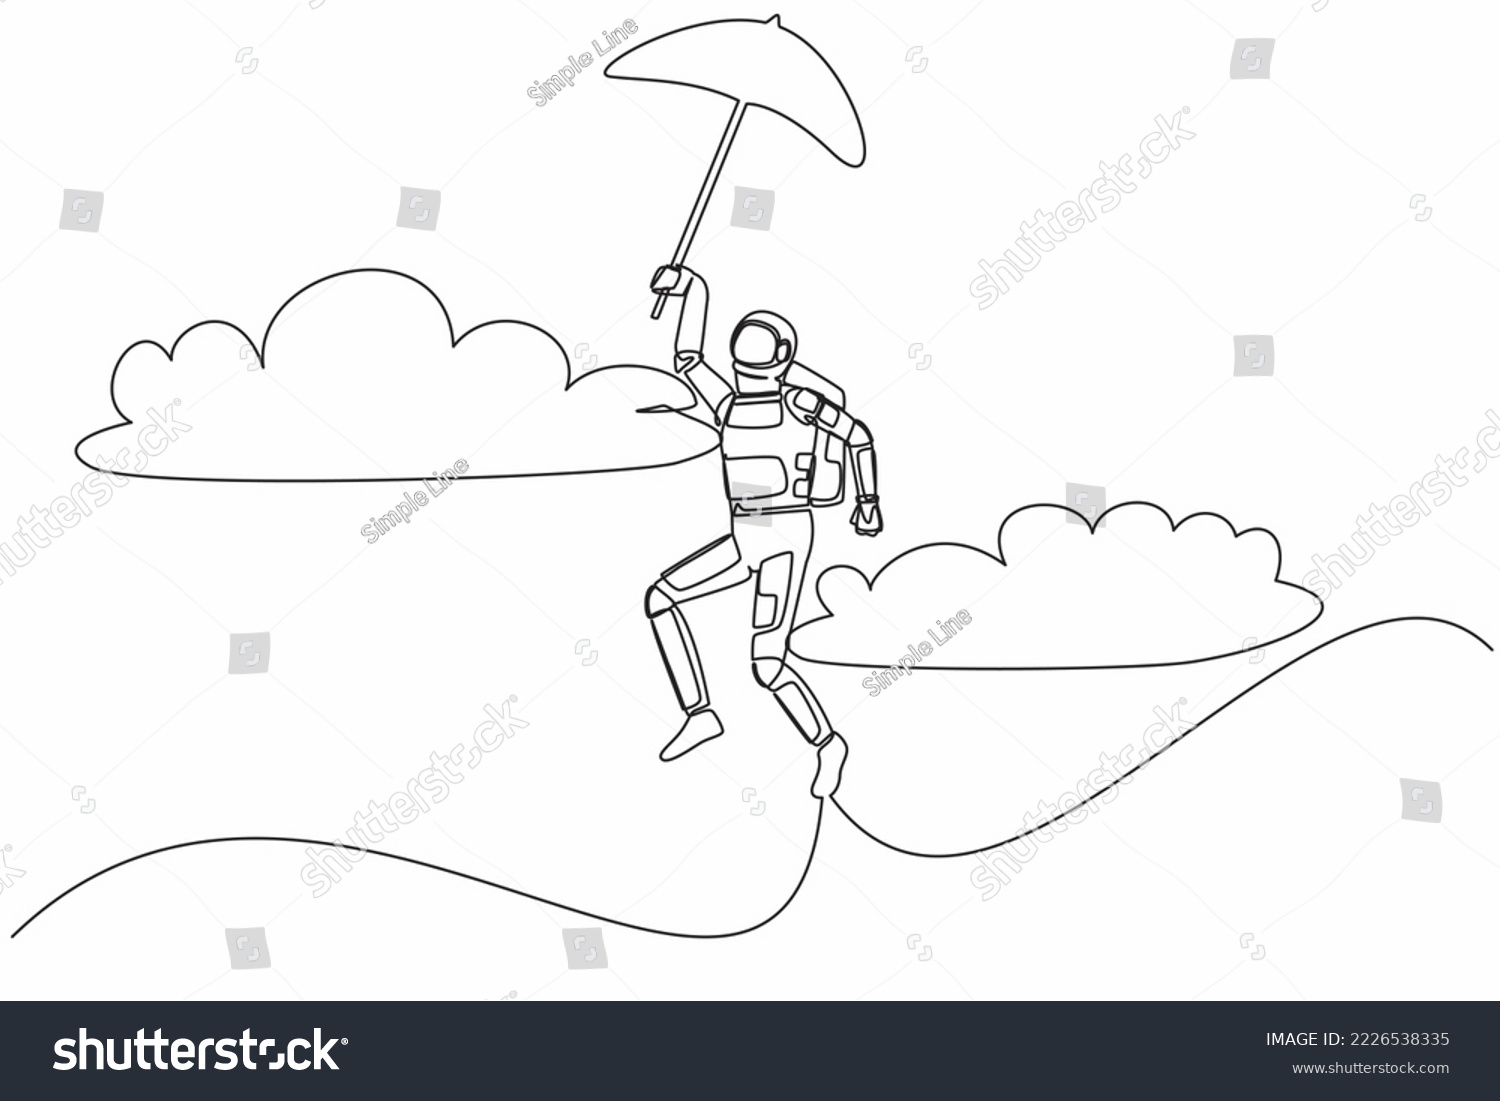 SVG of Single one line drawing young astronaut with umbrella through cloud. Reaches goal, target, find solution in moon spacewalk. Cosmic galaxy space. Continuous line draw graphic design vector illustration svg